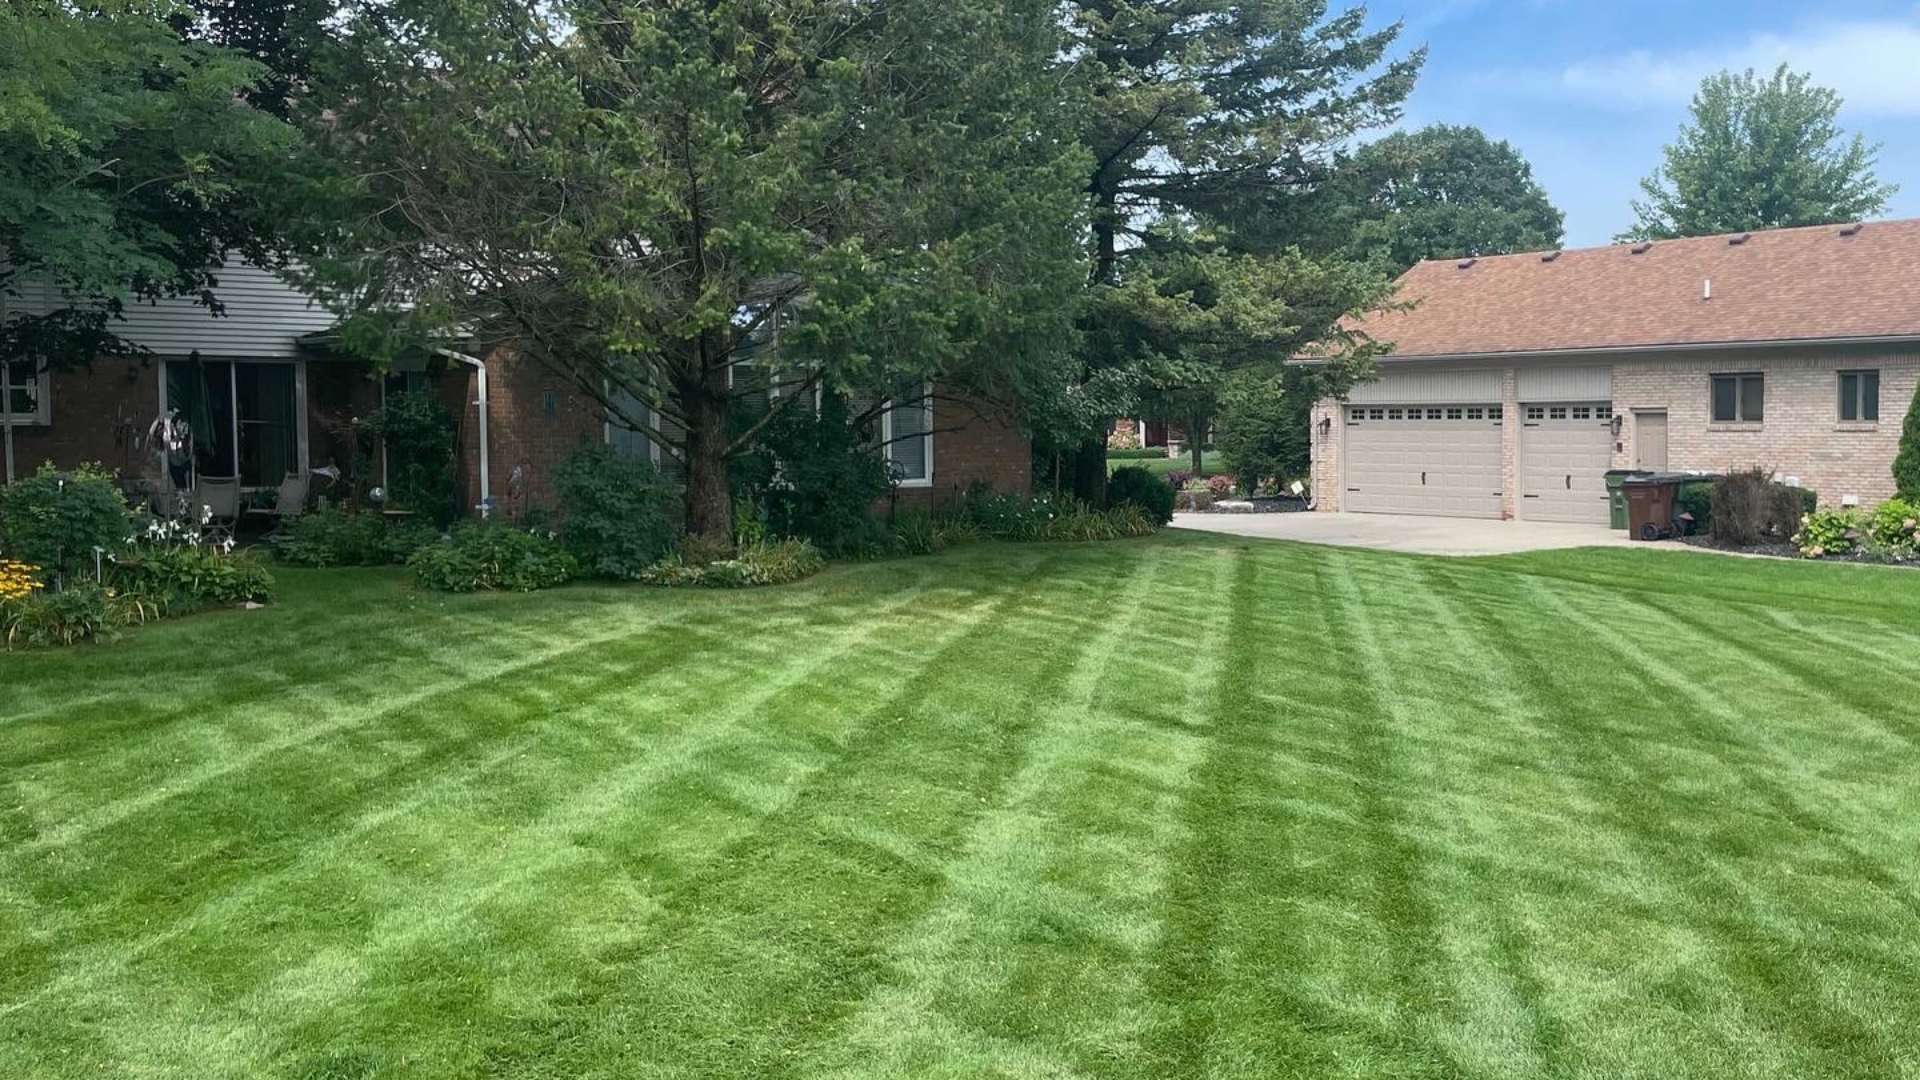 Mowed lawn for clients with patterns added in Mount Clemens,  MI.